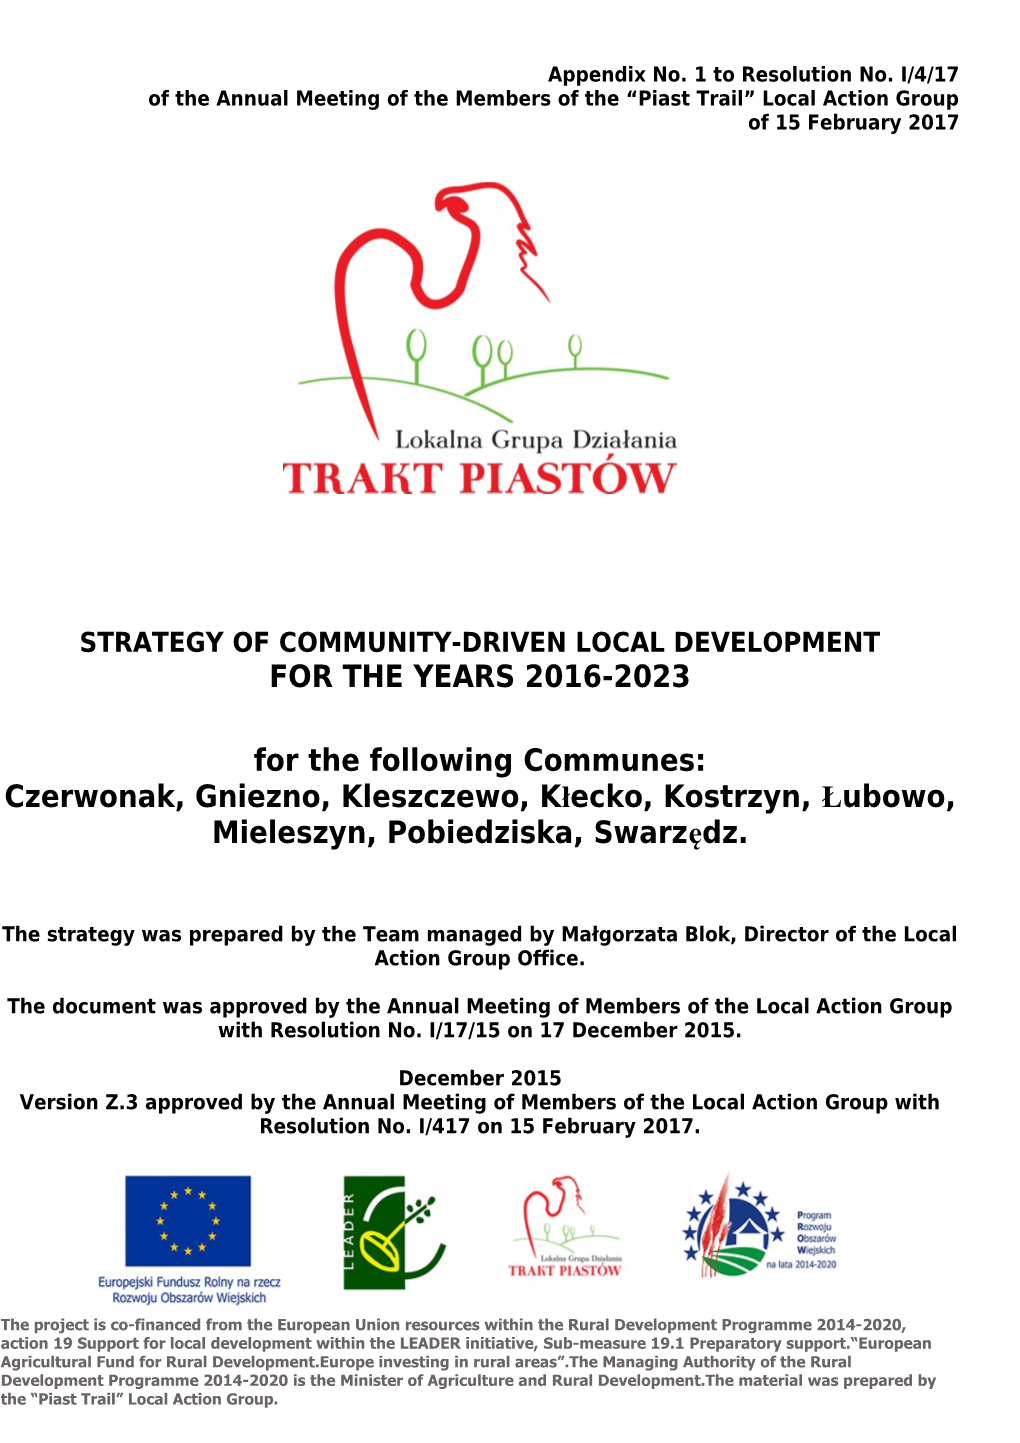 Of the Annual Meeting of the Members of the Piast Trail Local Action Group